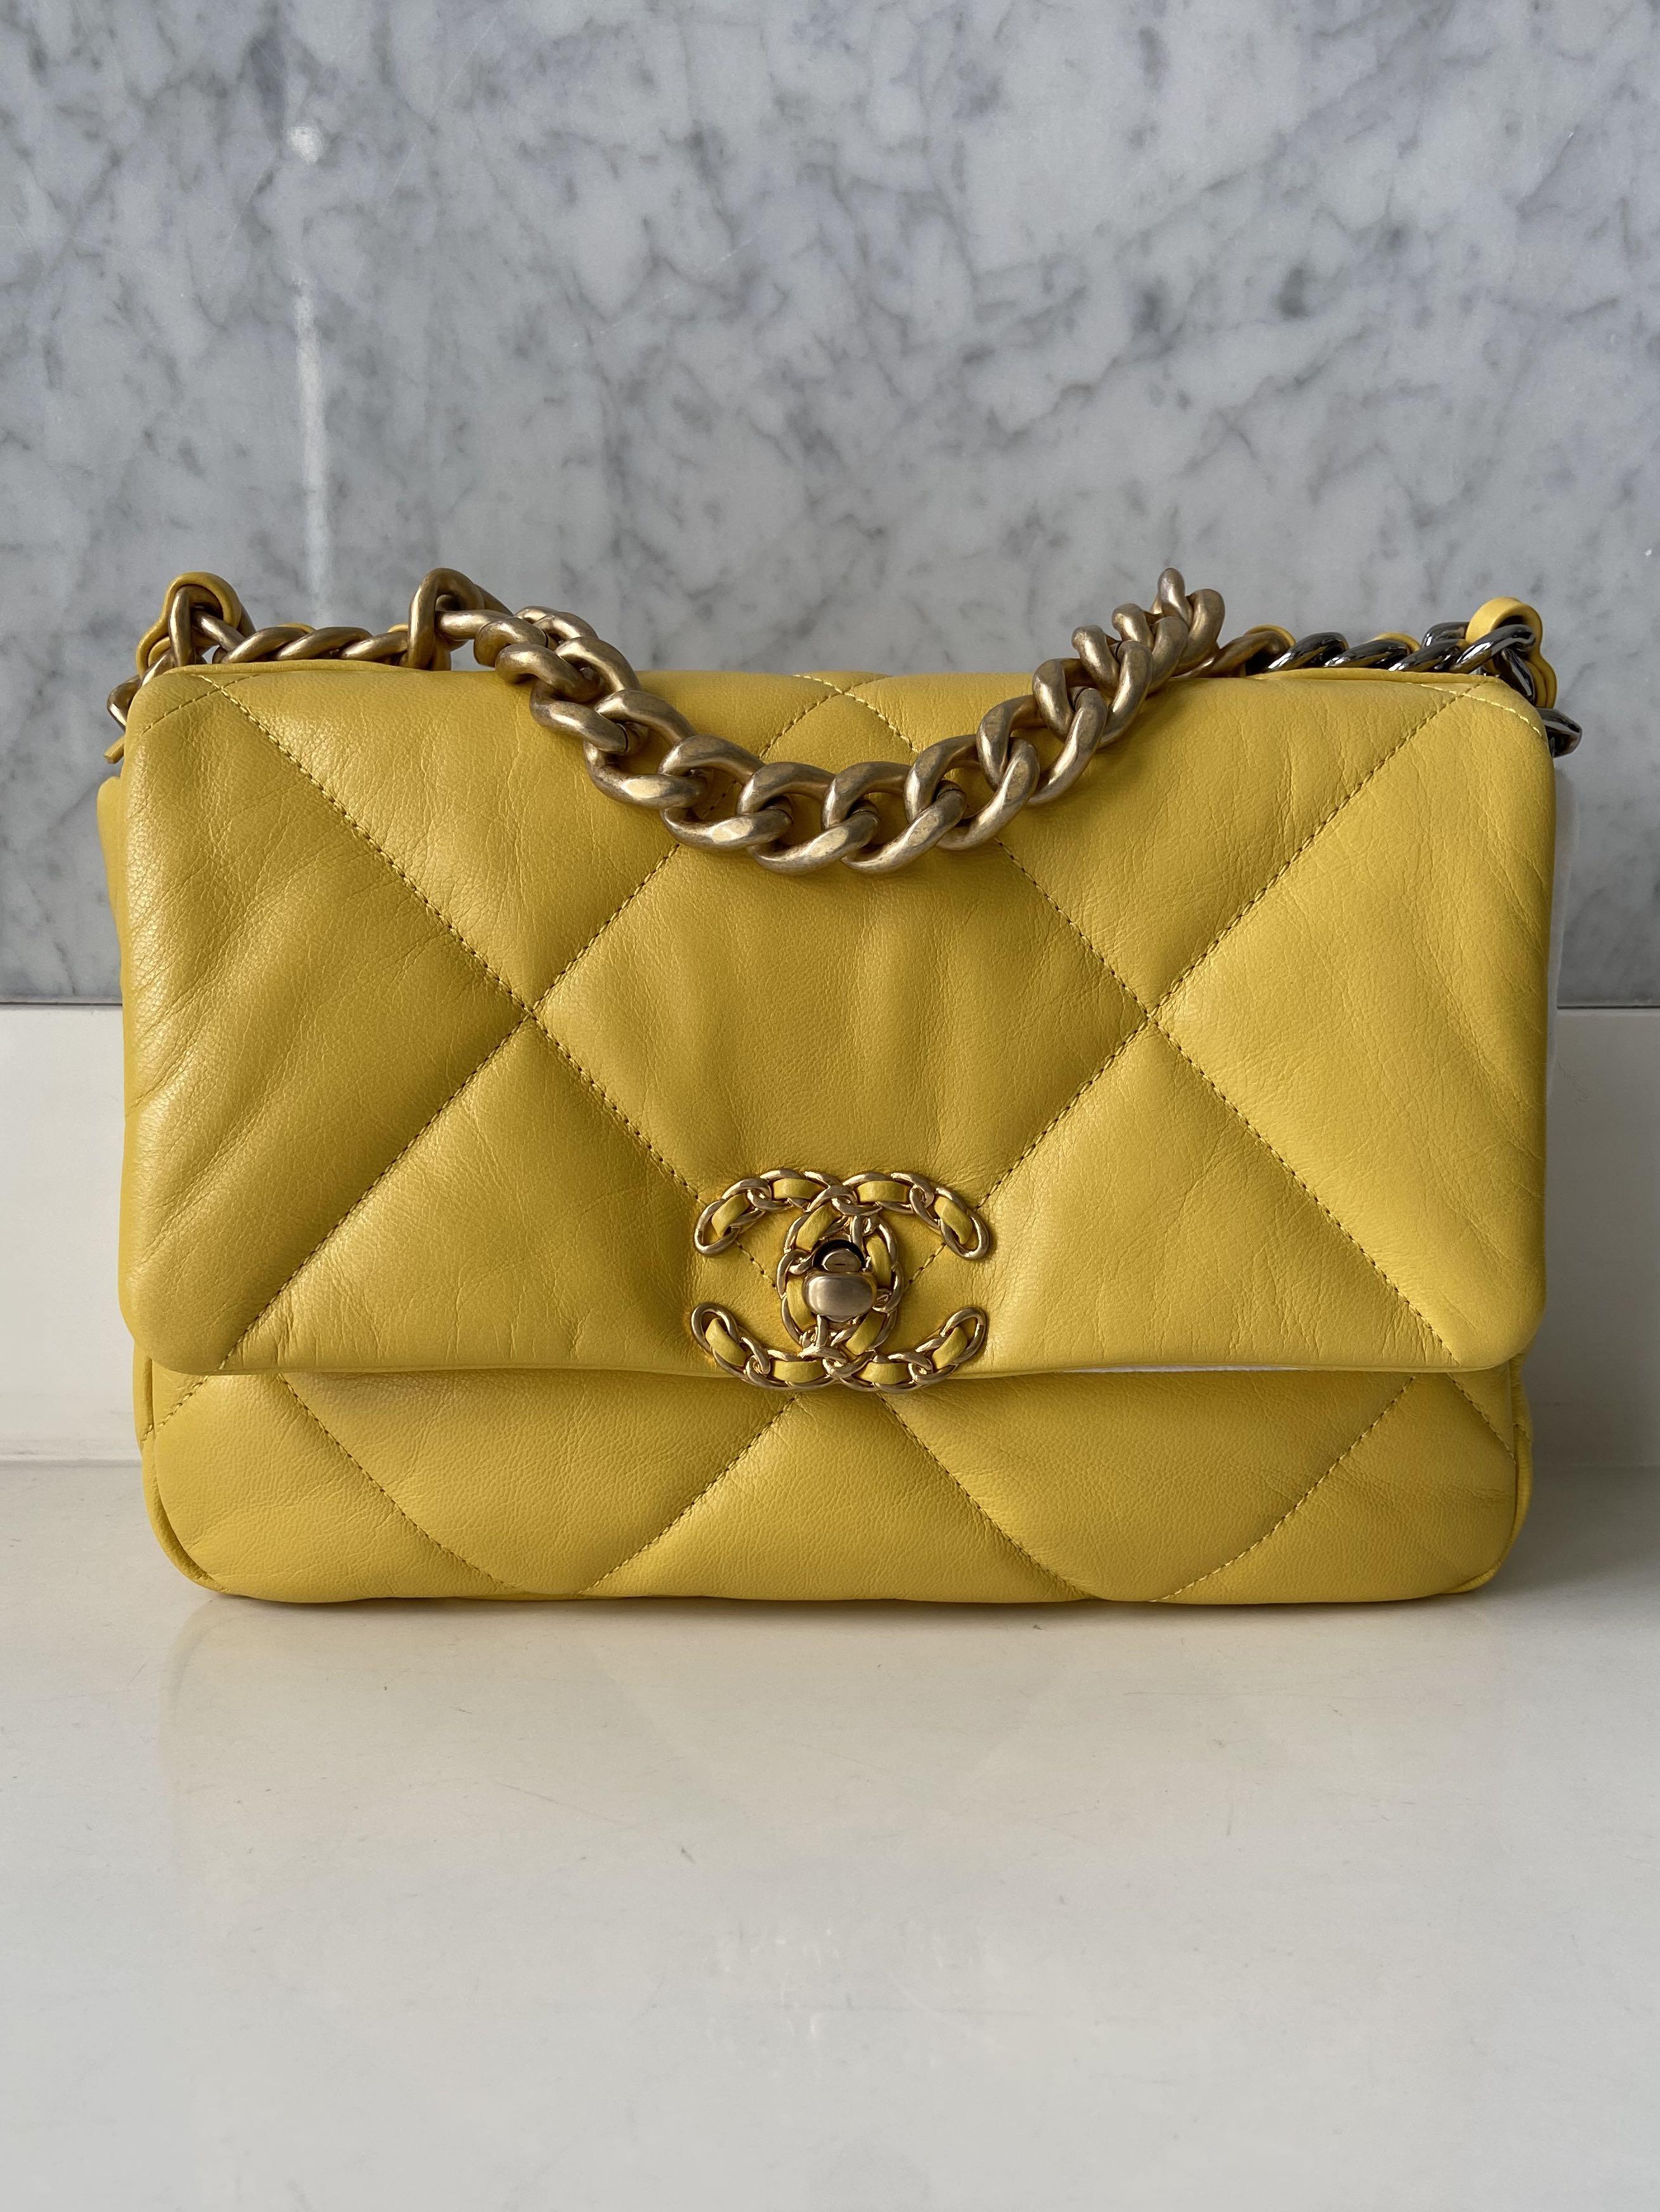 Chanel Vintage  Camellia CC Tote Bag  Yellow  Leather and Canvas Handbag   Luxury High Quality  Avvenice